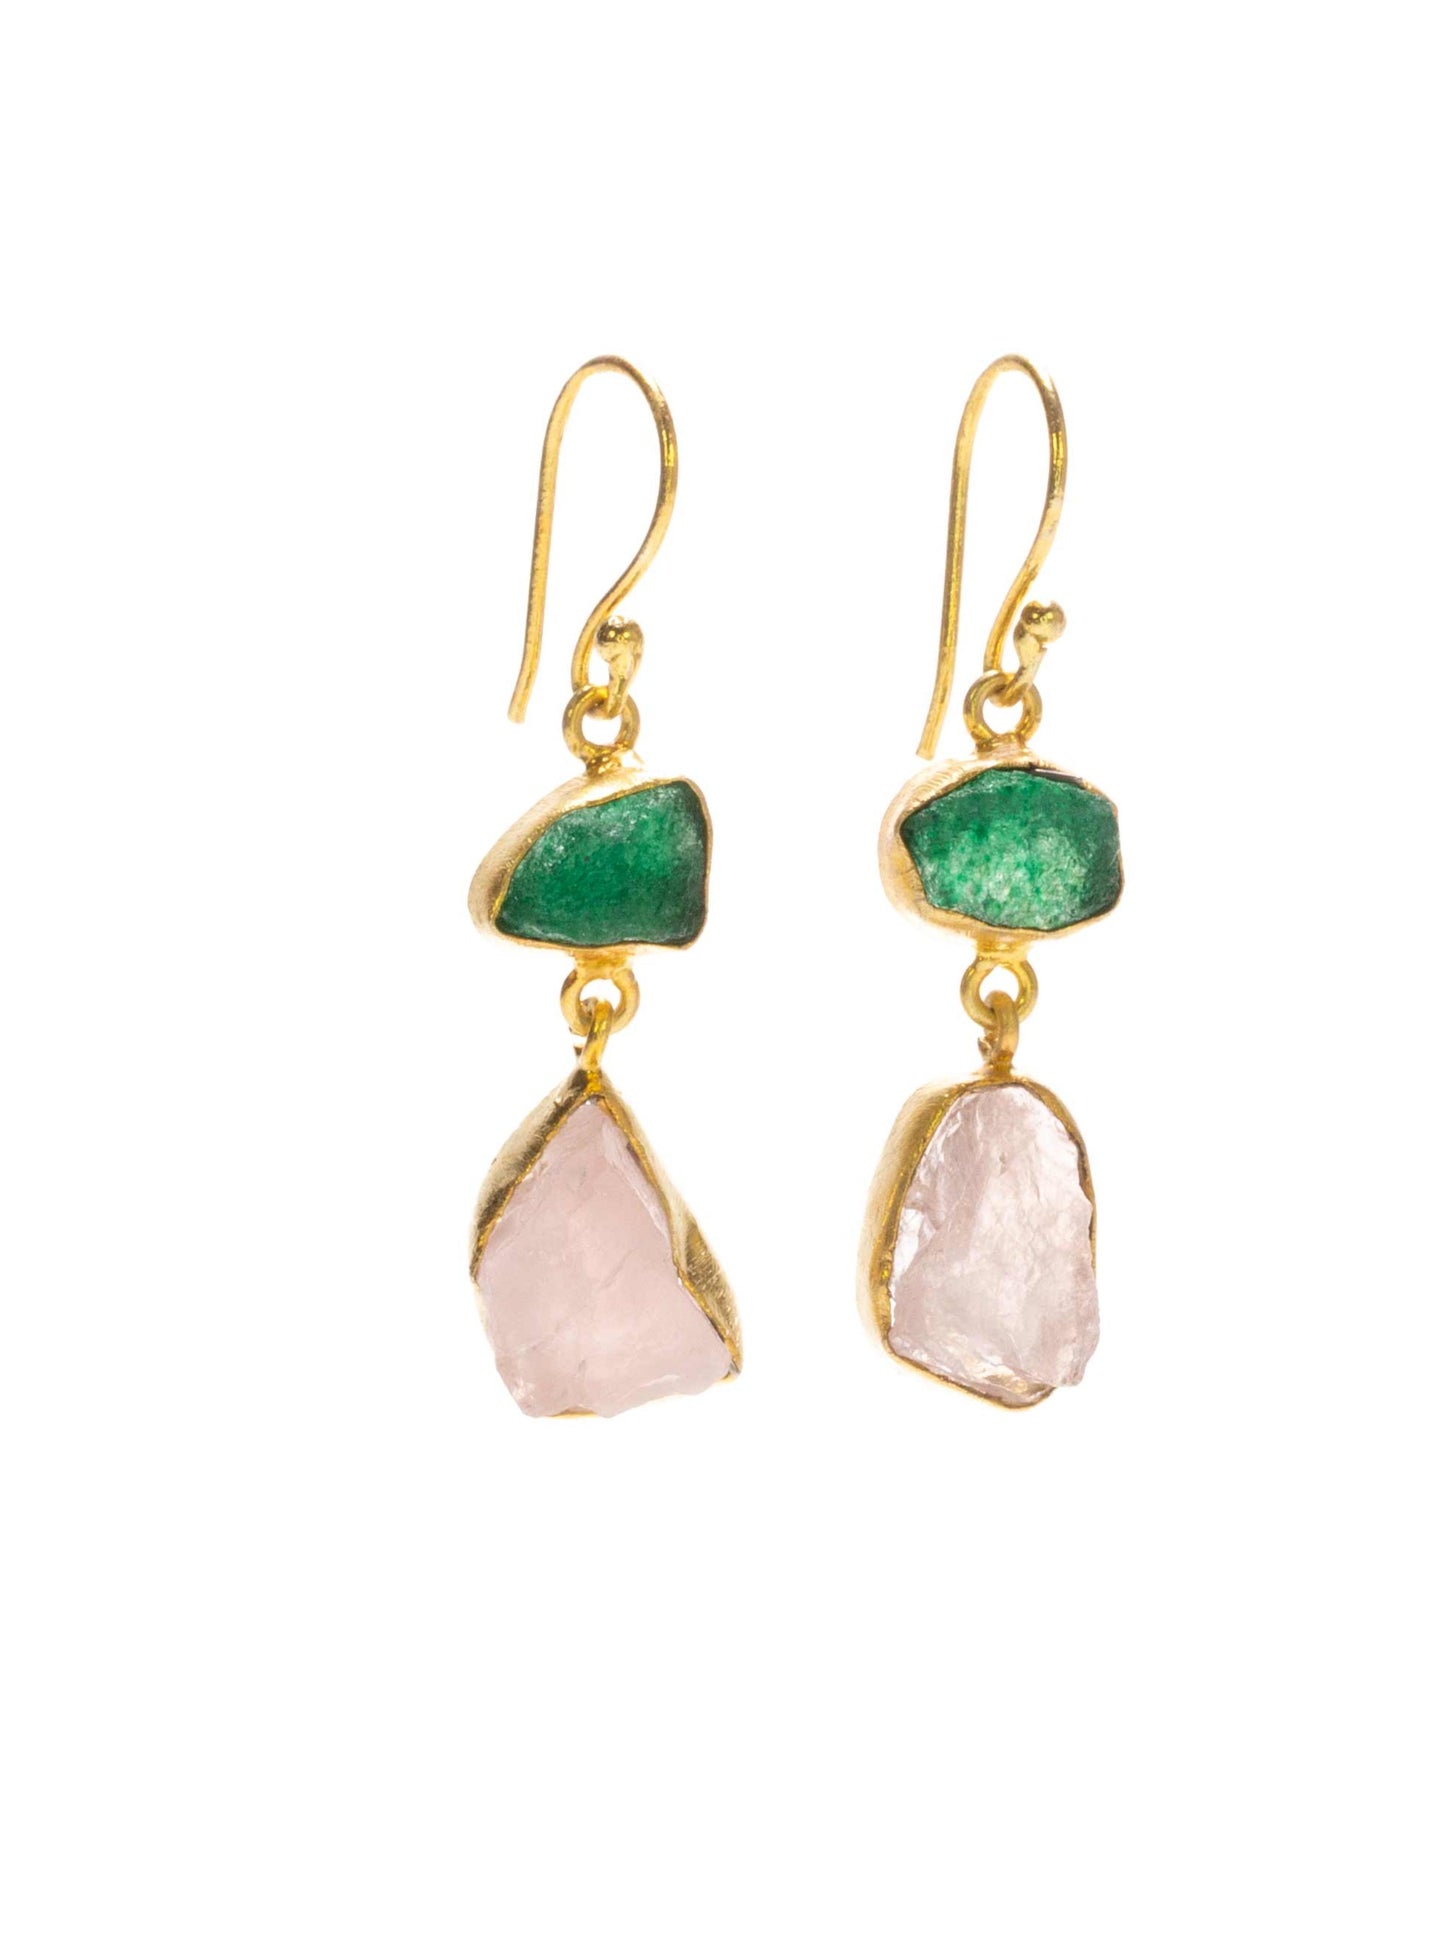 Gold Luxe earrings - aventurine and rose quartz double drop dangles